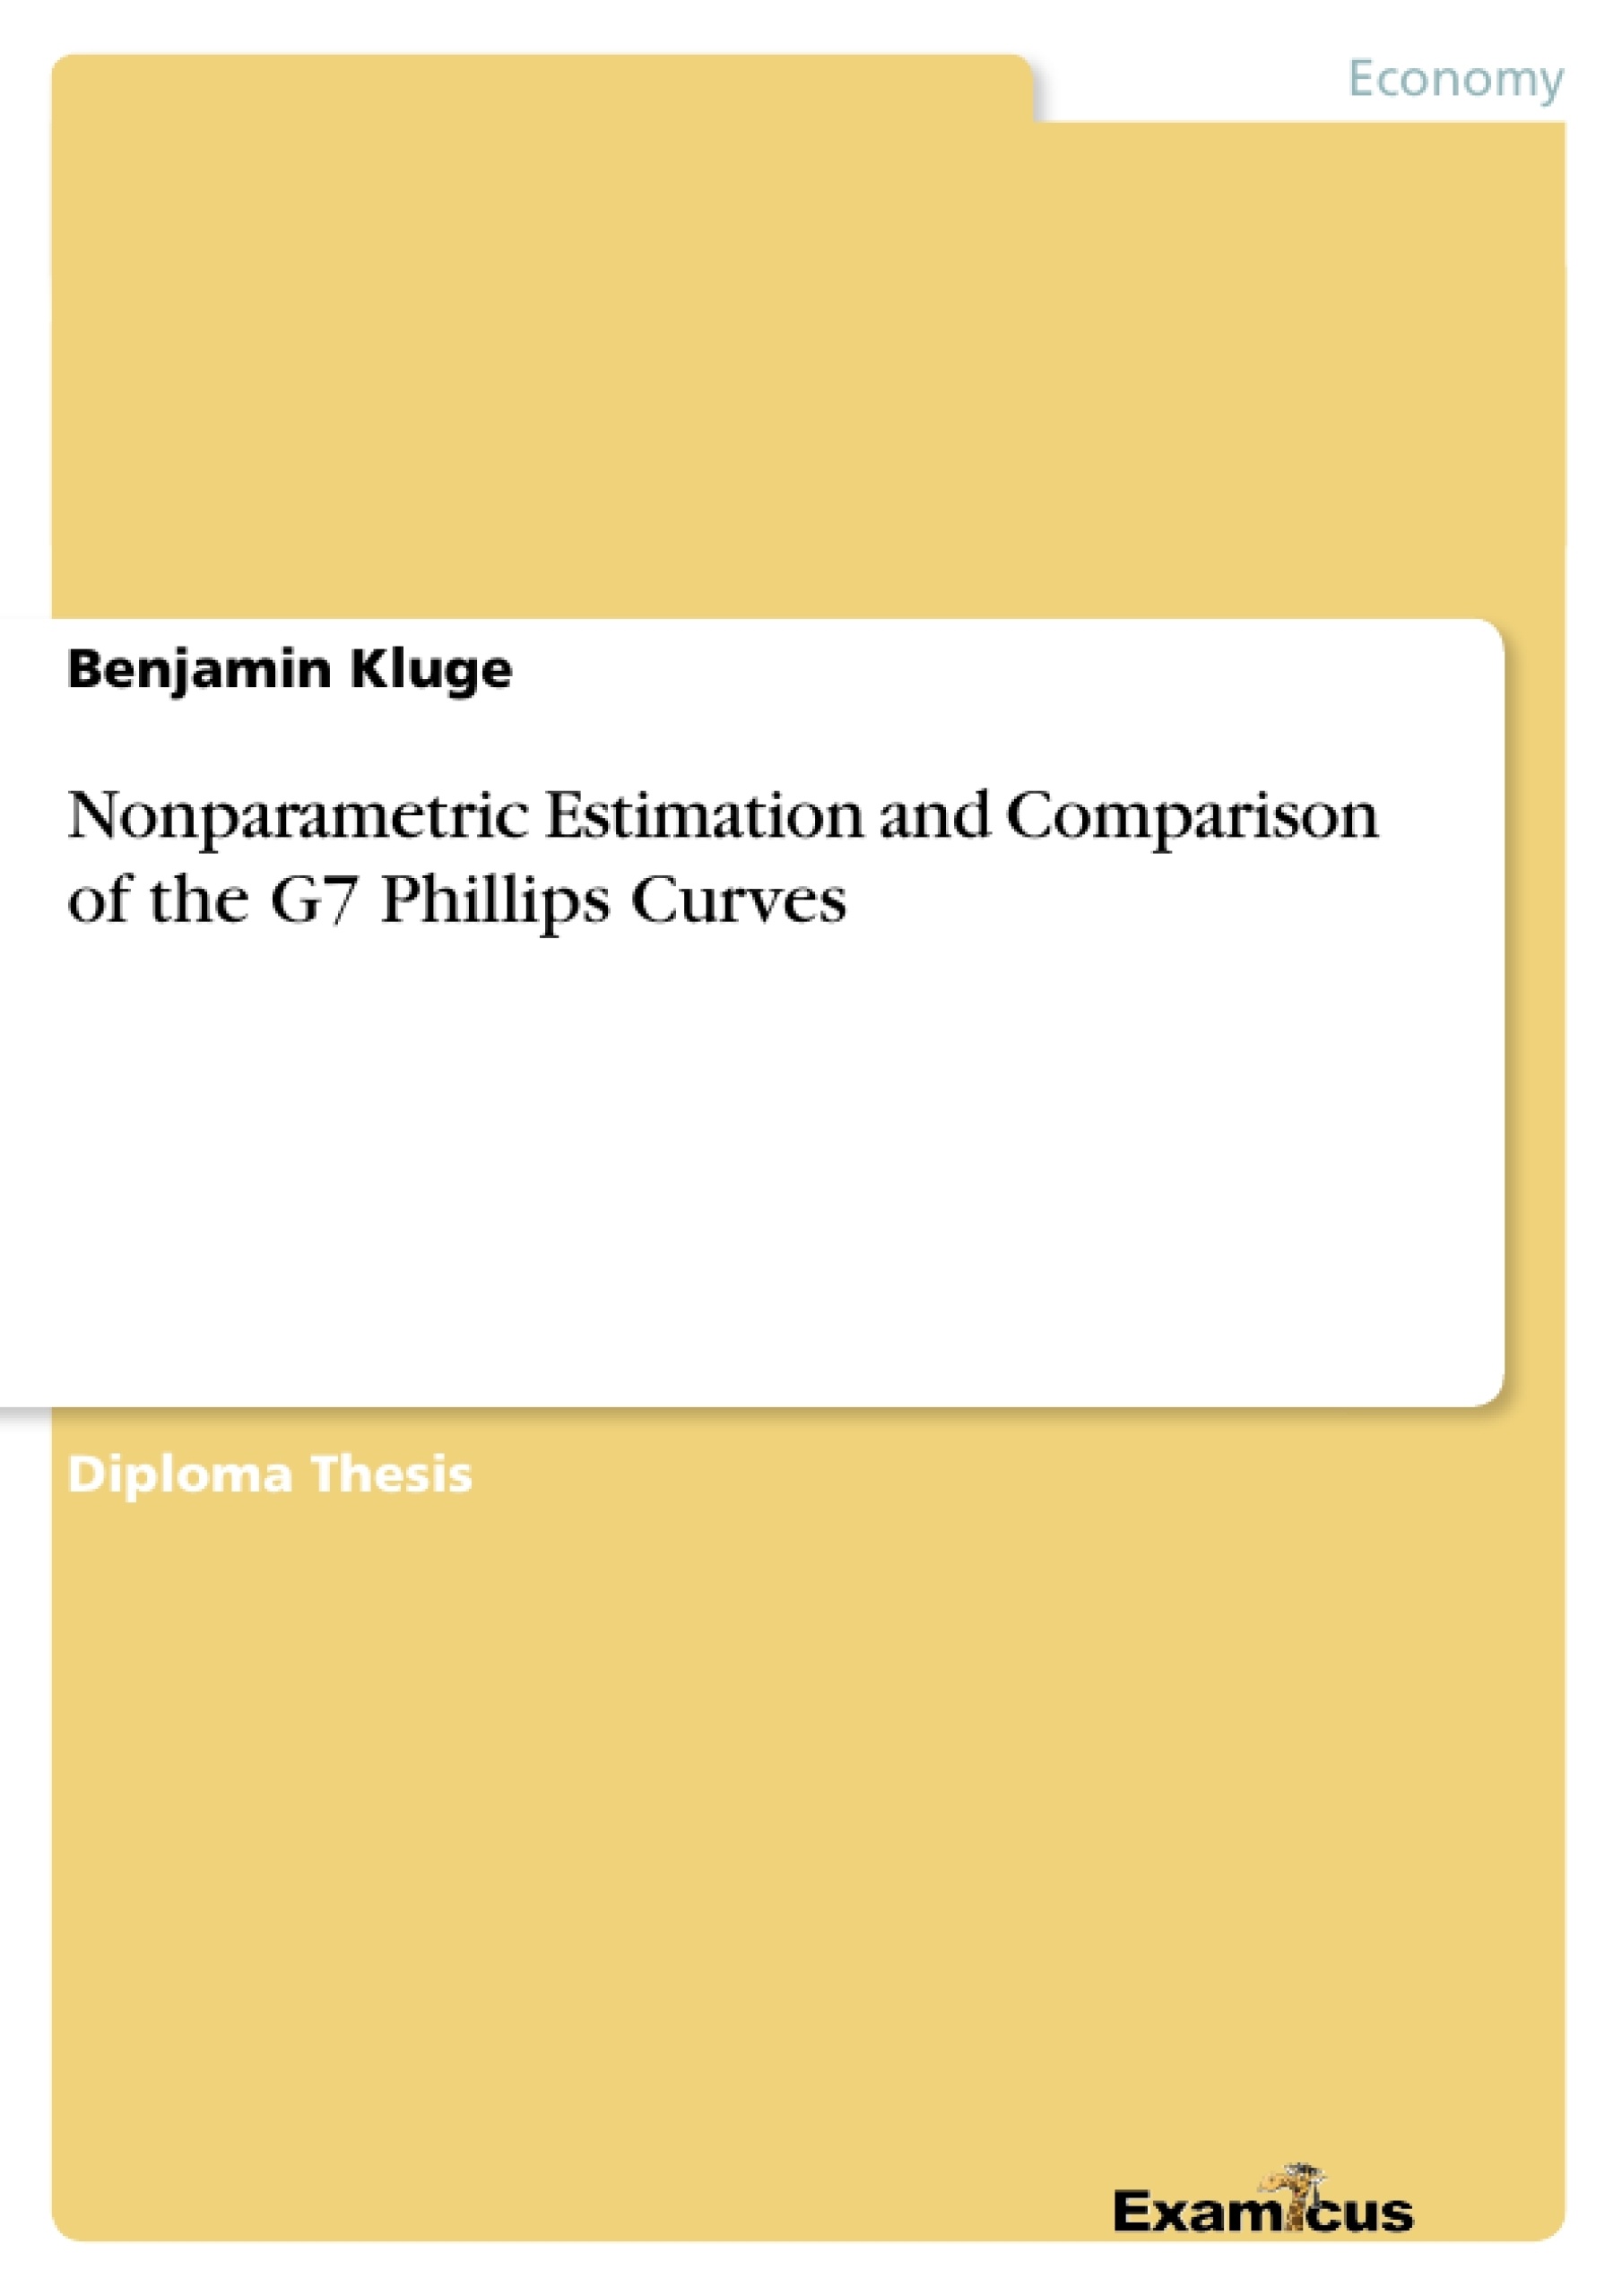 Titel: Nonparametric Estimation and Comparison of the G7 Phillips Curves